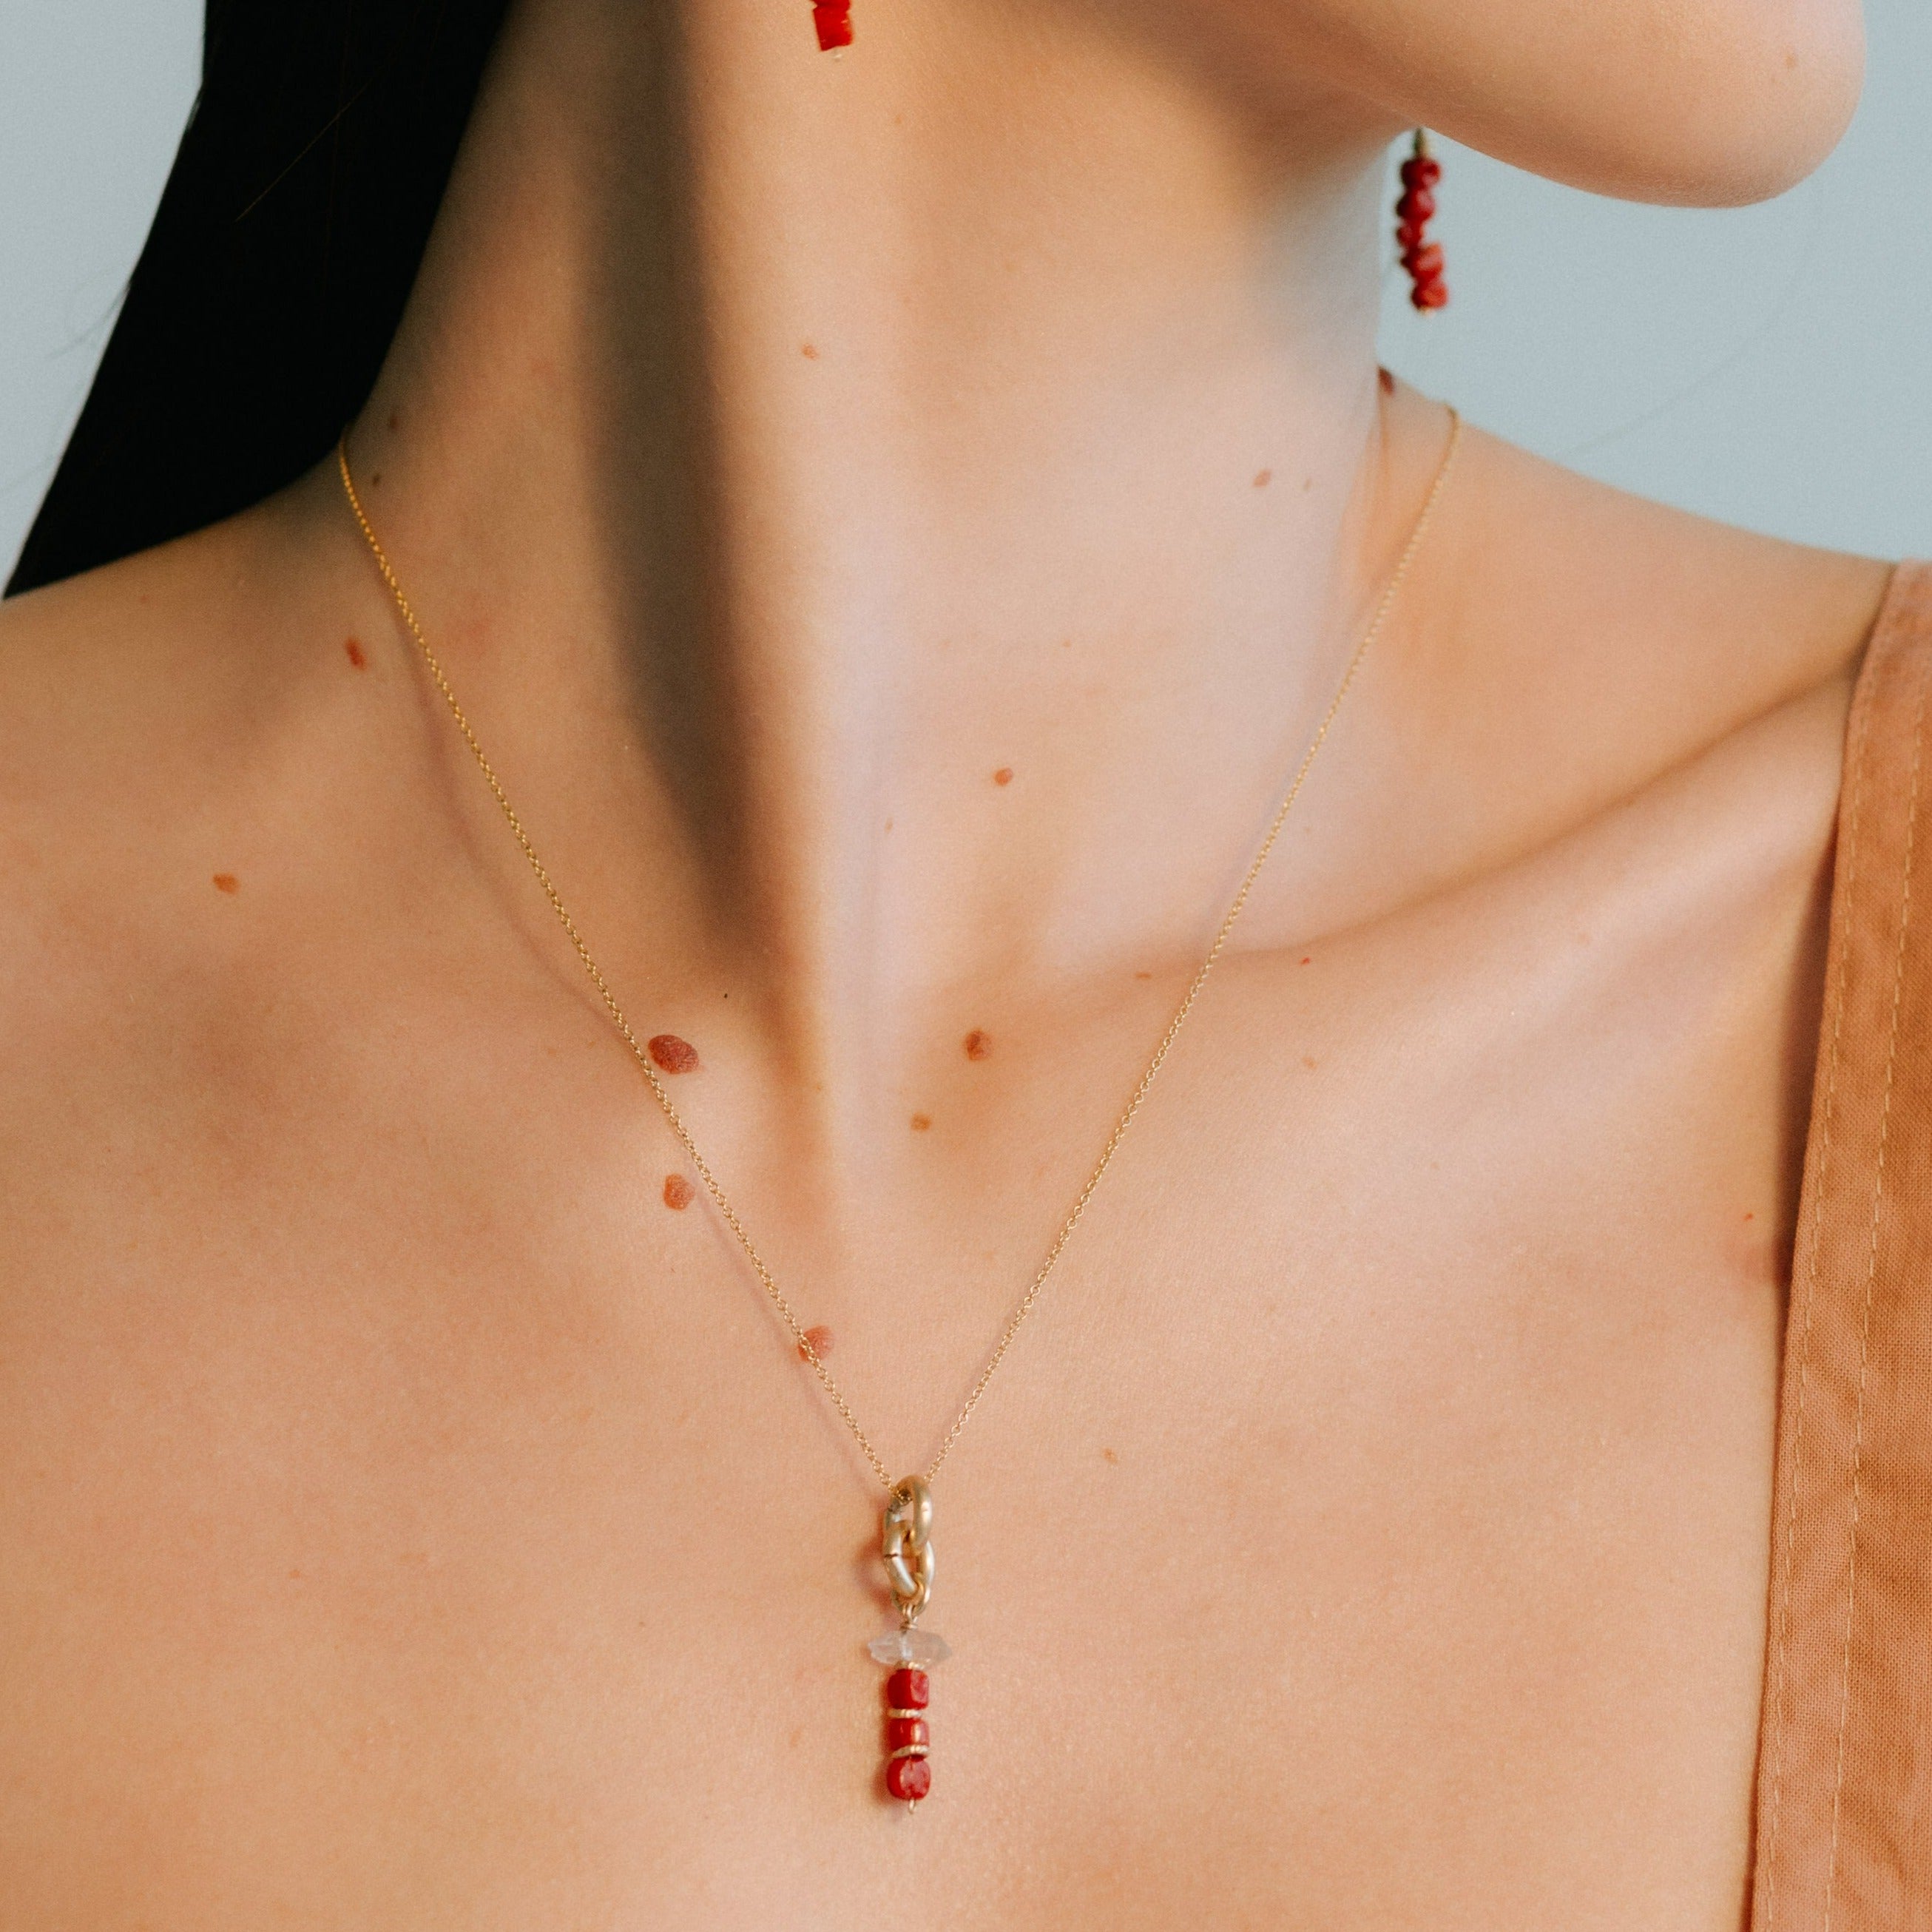 Koralli Necklace #1 - Red Agate, Red Coral, Diamond Quartz & Rice Pearl Necklaces TARBAY   